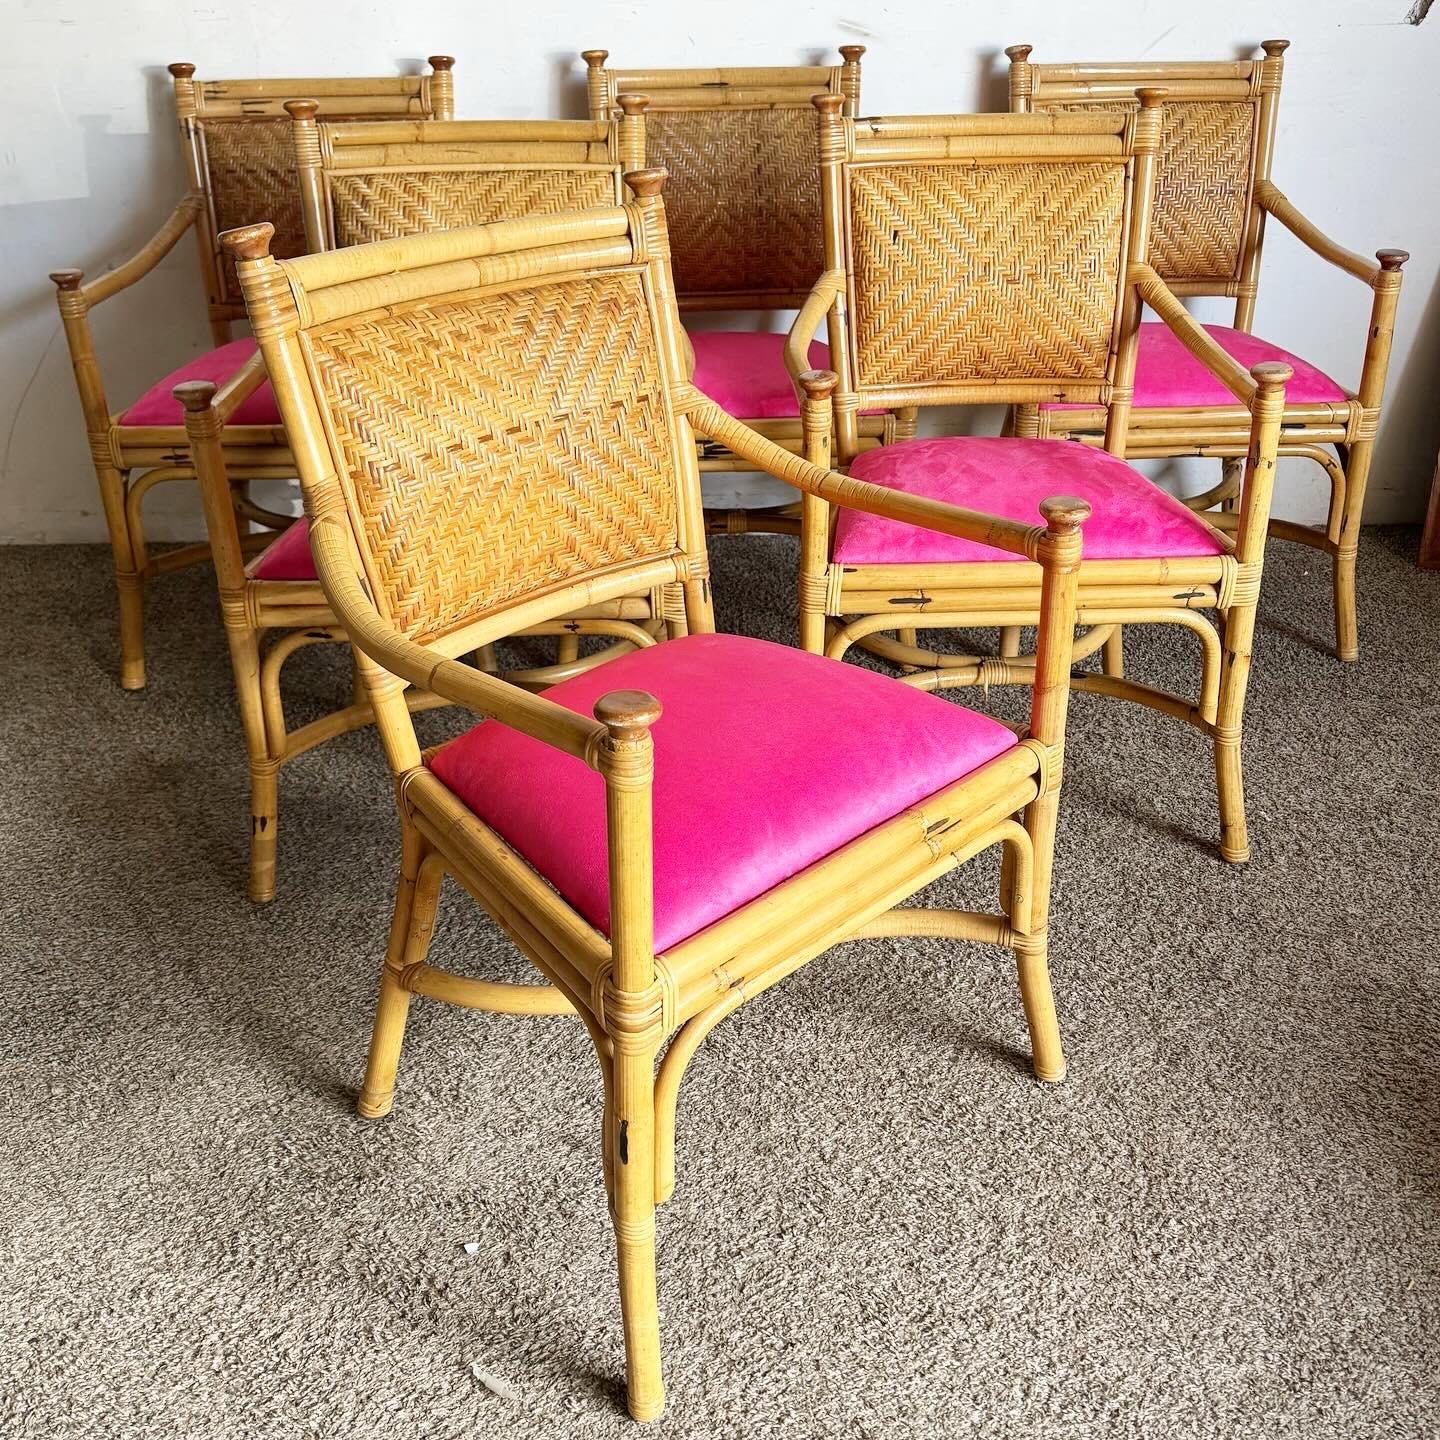 This set of six Boho Chic Dining Arm Chairs features a natural wicker, rattan, and bamboo build, accented with hot pink cushions. Perfect for adding a vibrant touch to your dining space, these chairs blend bohemian style with comfort and a pop of